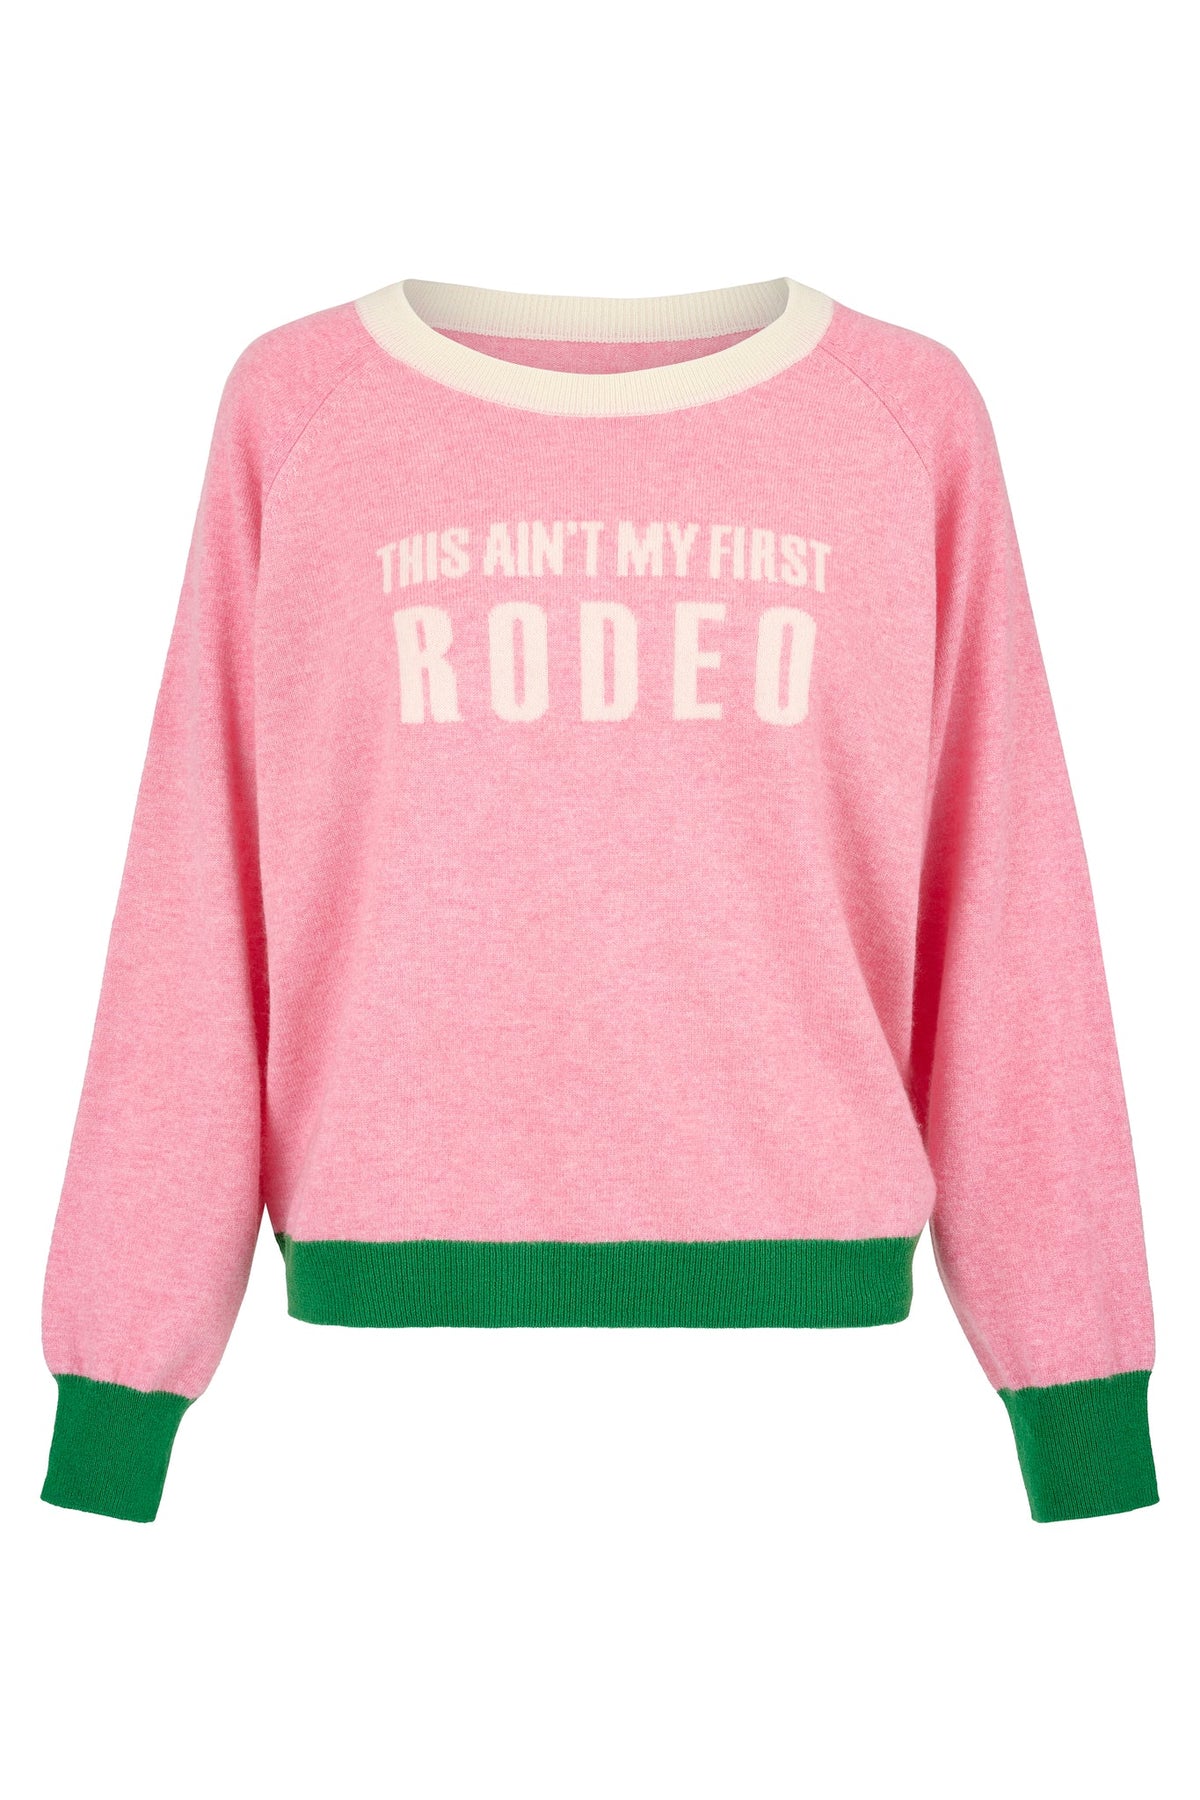 Pink crew neck cashmere raglan sleeved jumper with "this ain't my first rodeo" in cream with cream neckline and green cuffs and hem